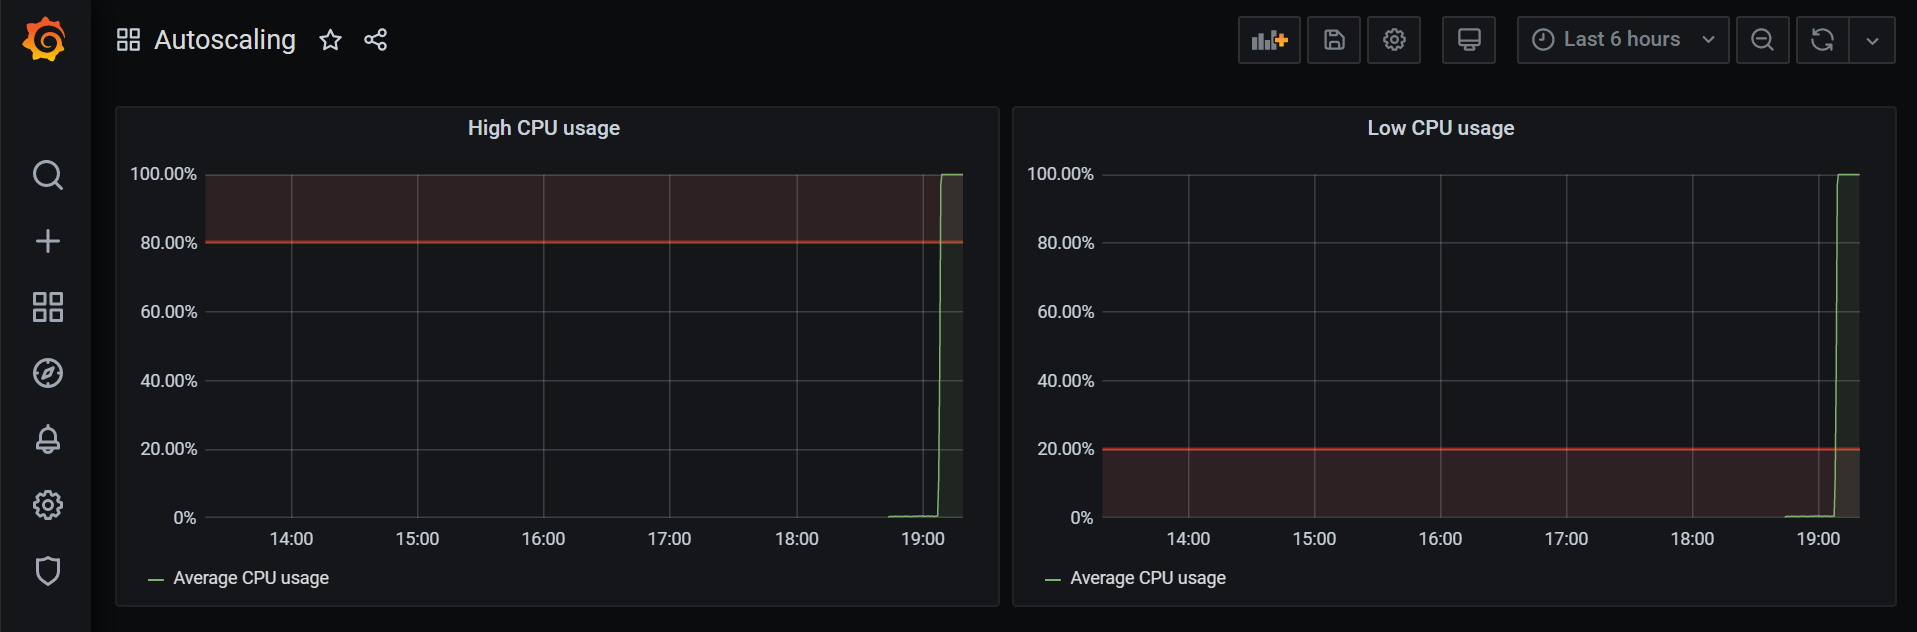 A picture of the Grafana dashboard showing both a high and a low CPU alert setting.